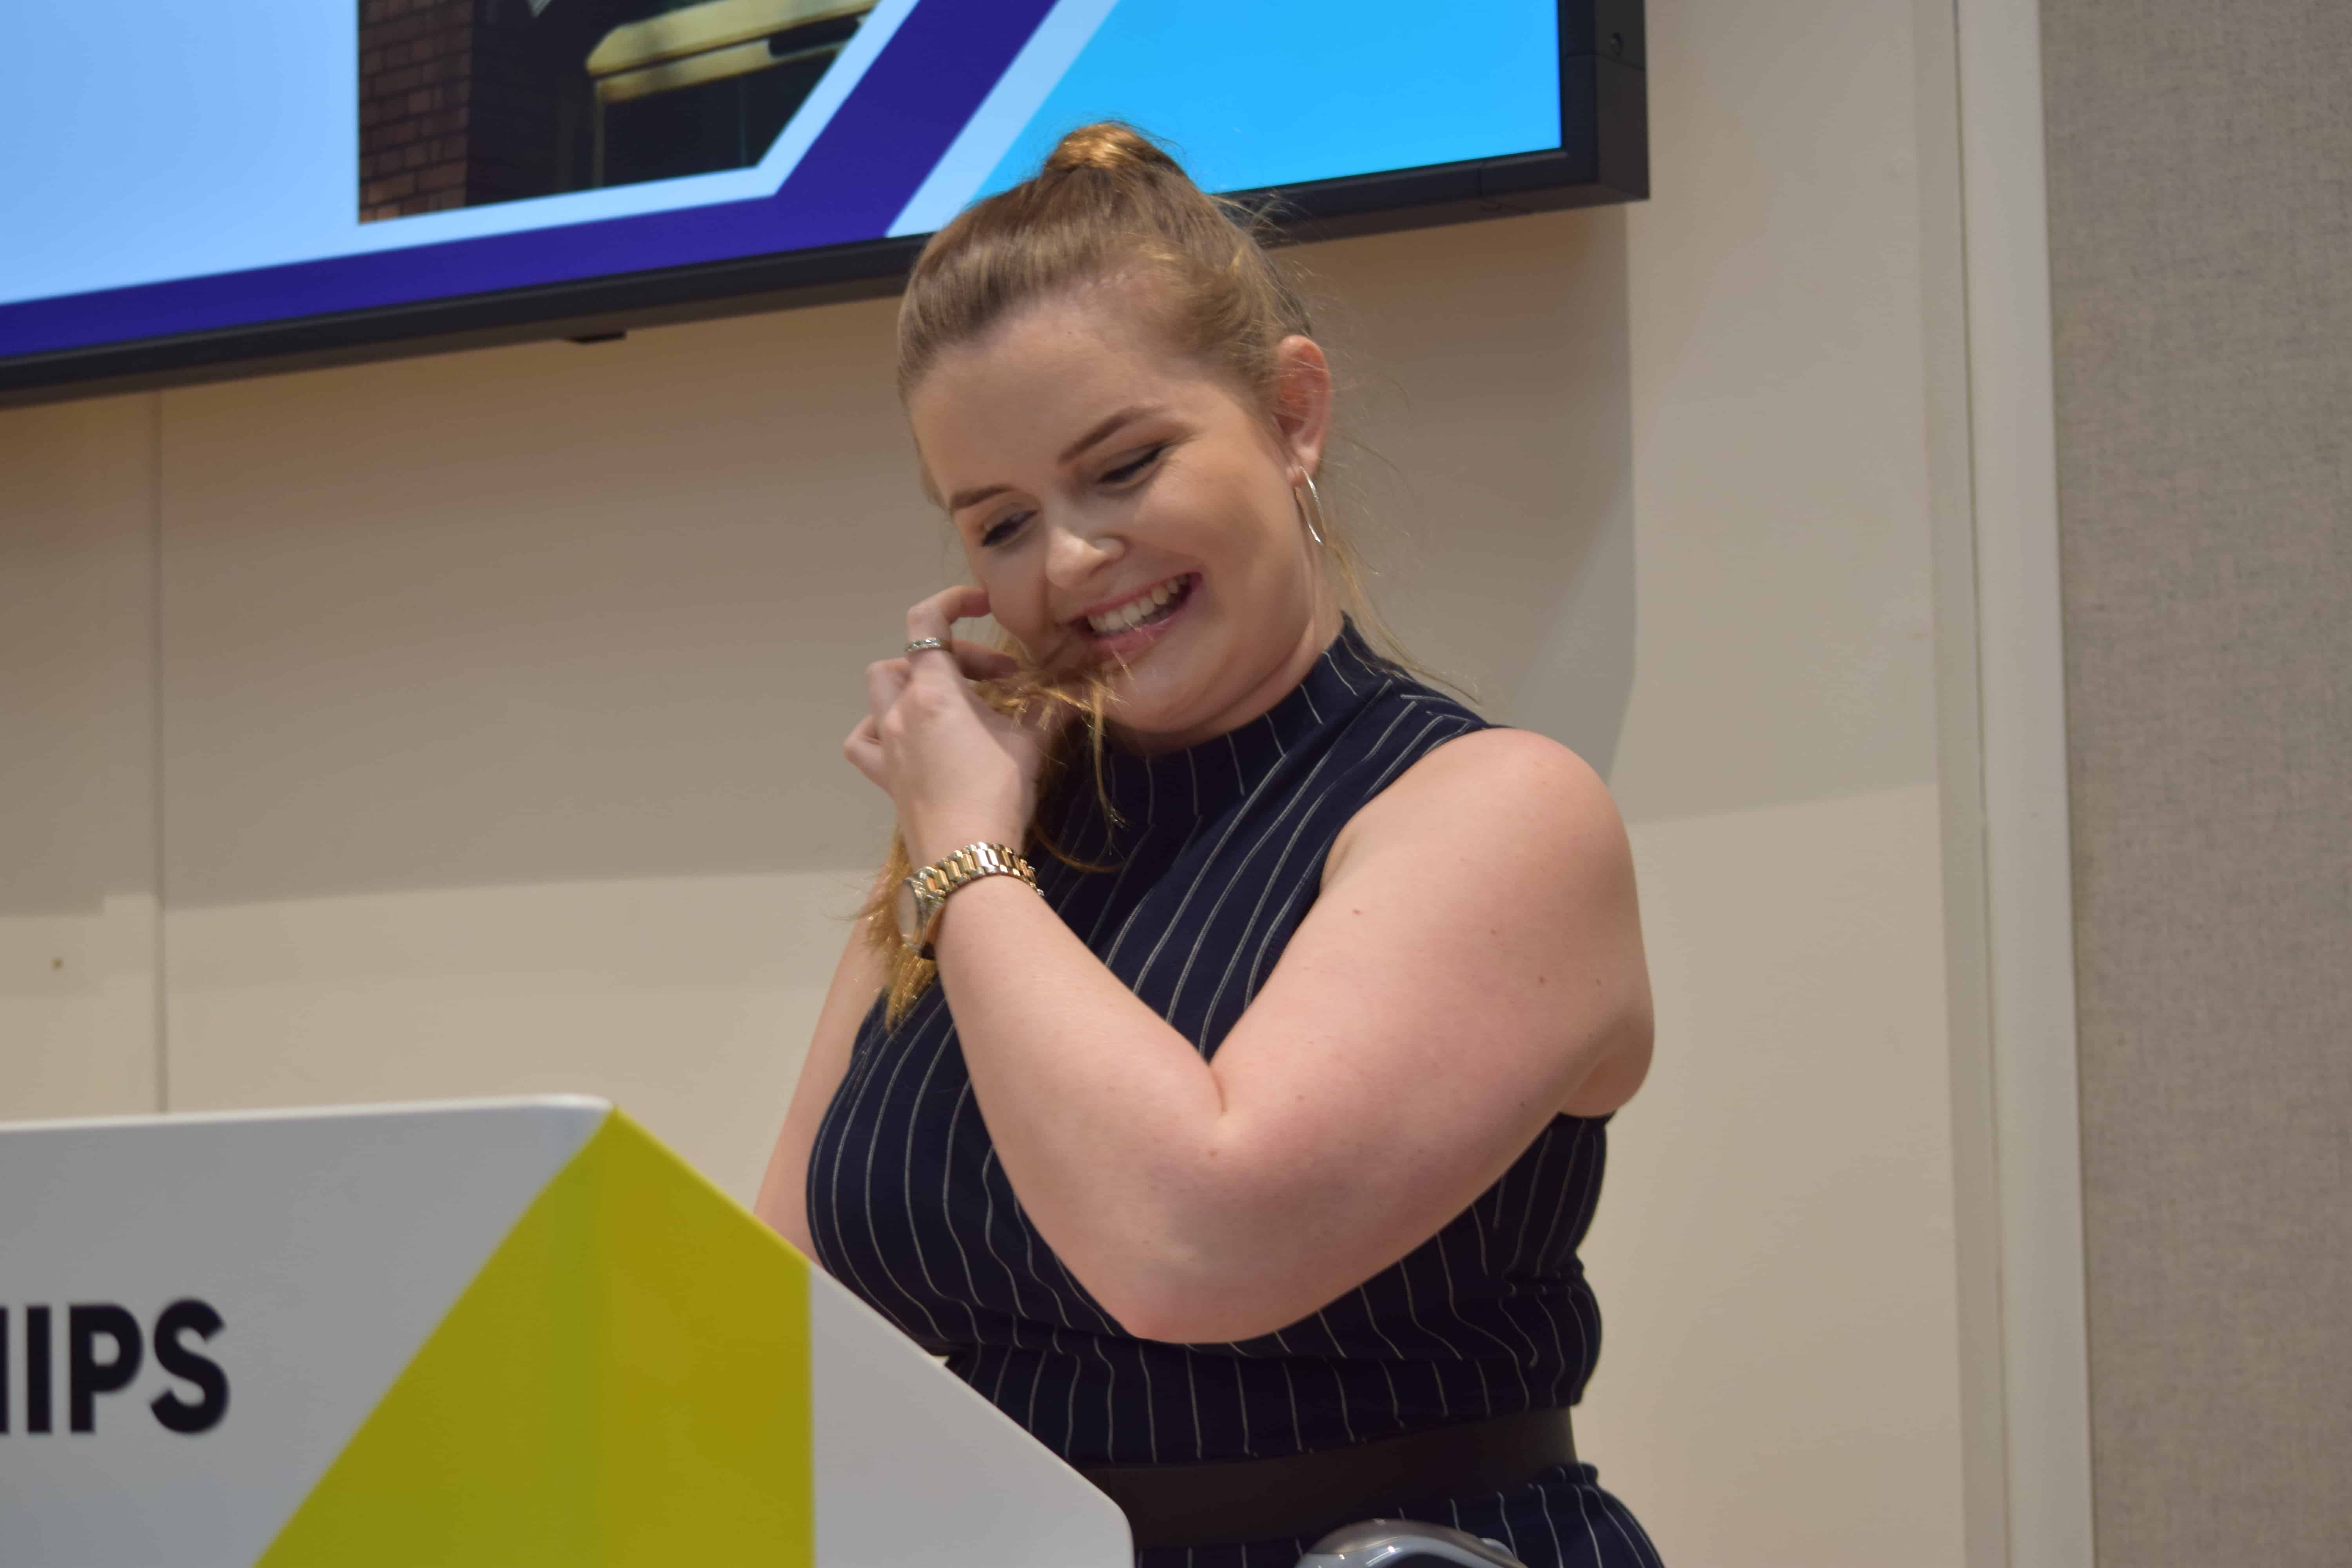 Megan Whitbread, a London South Bank University building services engineering apprentice spoke at the event